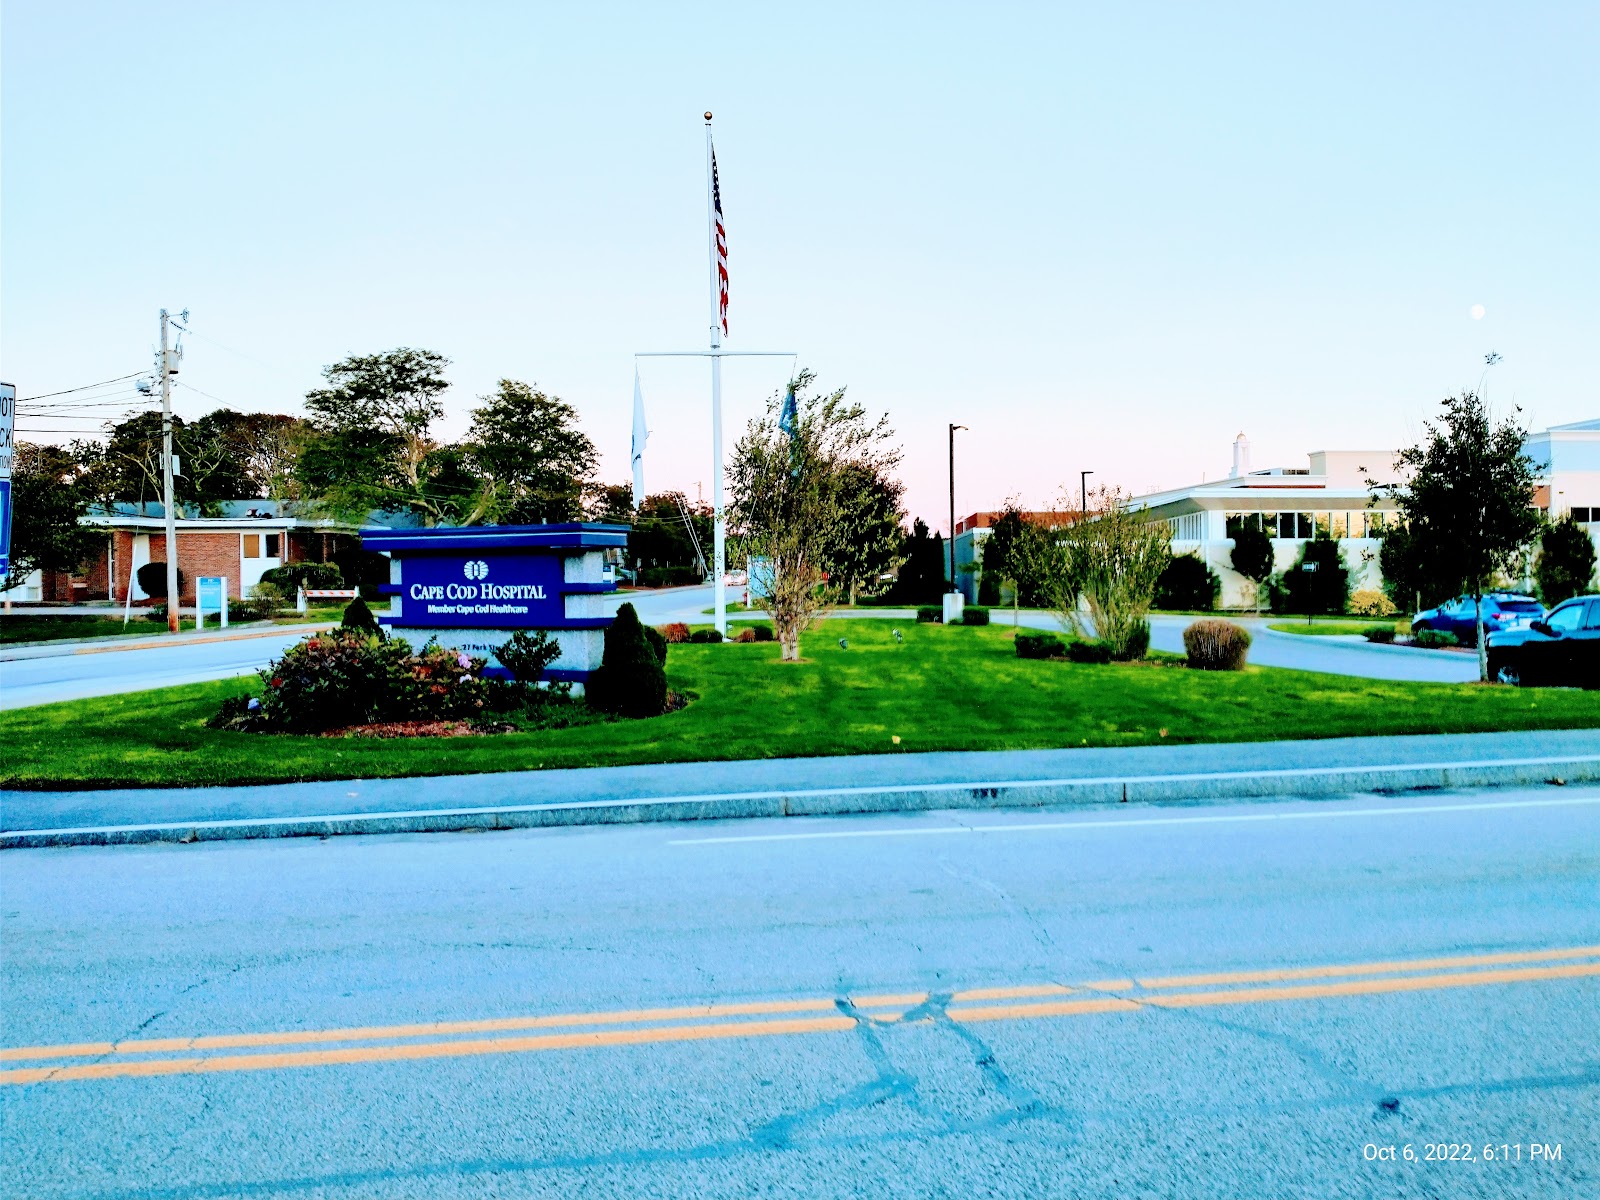 Cape Cod Hospital - Centers for Behavioral Health